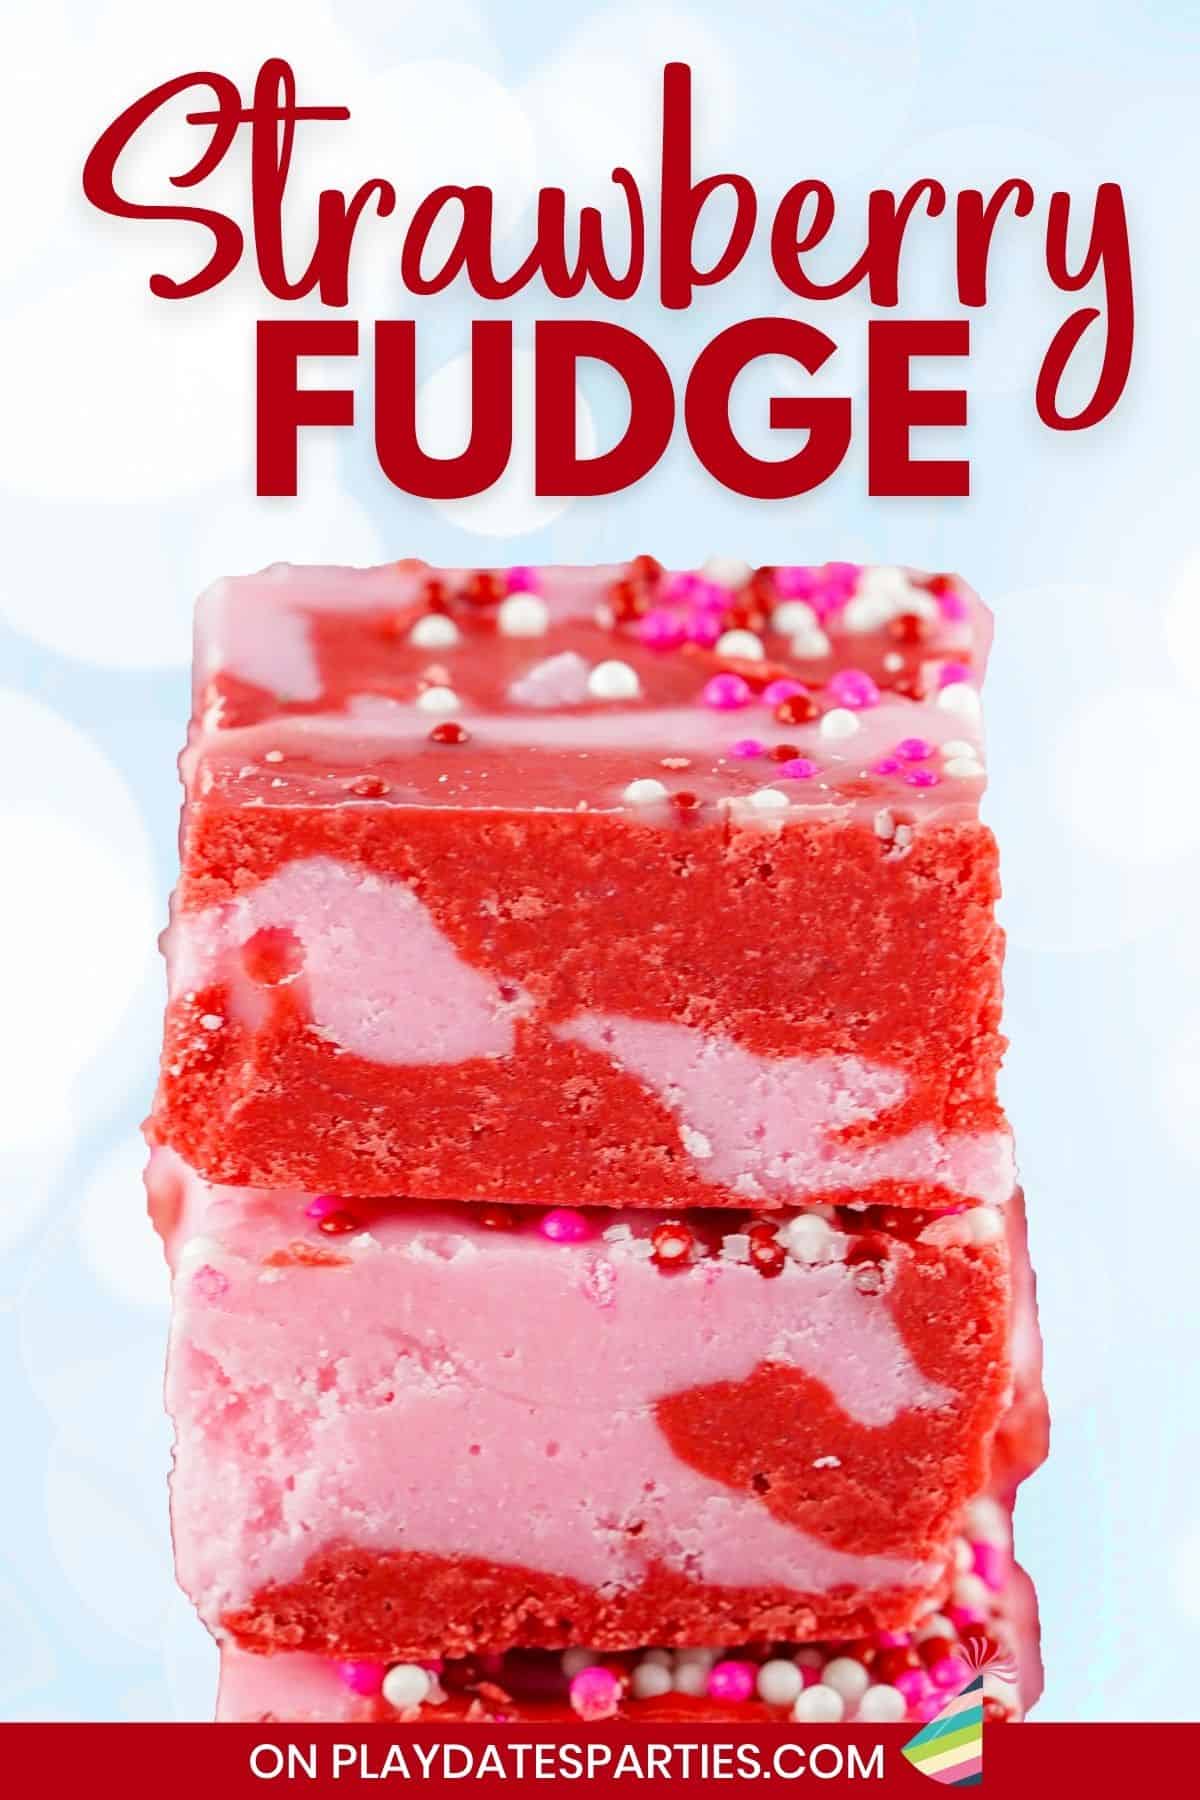 Close up image of cut pieces of red and pink fudge with Valentine's Day sprinkles.